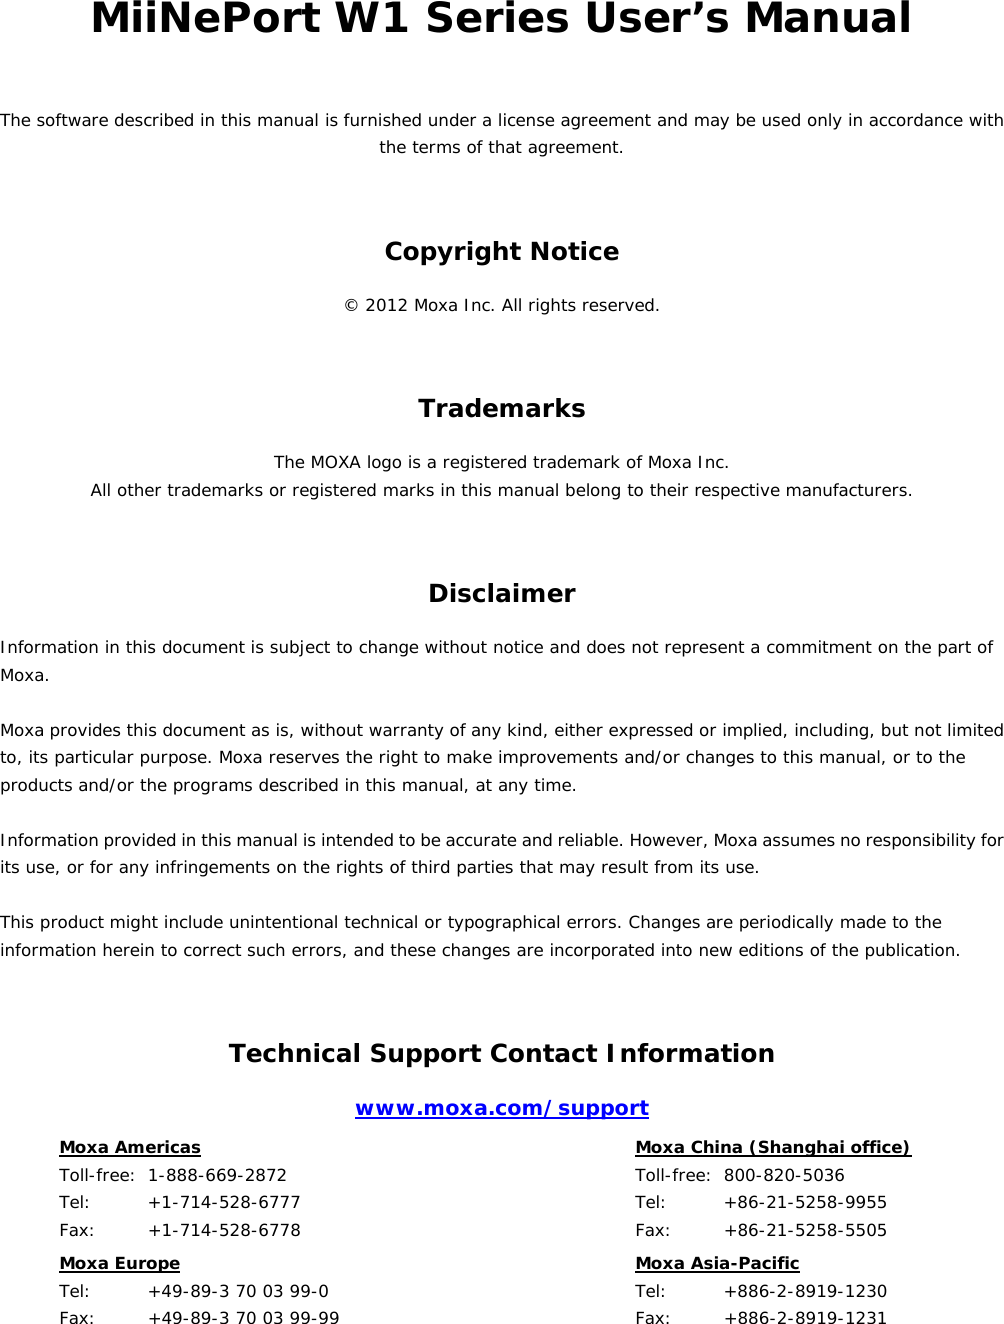 MiiNePort W1 Series User’s Manual The software described in this manual is furnished under a license agreement and may be used only in accordance with the terms of that agreement. Copyright Notice © 2012 Moxa Inc. All rights reserved. Trademarks The MOXA logo is a registered trademark of Moxa Inc. All other trademarks or registered marks in this manual belong to their respective manufacturers. Disclaimer Information in this document is subject to change without notice and does not represent a commitment on the part of Moxa.  Moxa provides this document as is, without warranty of any kind, either expressed or implied, including, but not limited to, its particular purpose. Moxa reserves the right to make improvements and/or changes to this manual, or to the products and/or the programs described in this manual, at any time.  Information provided in this manual is intended to be accurate and reliable. However, Moxa assumes no responsibility for its use, or for any infringements on the rights of third parties that may result from its use.  This product might include unintentional technical or typographical errors. Changes are periodically made to the information herein to correct such errors, and these changes are incorporated into new editions of the publication. Technical Support Contact Information www.moxa.com/support Moxa Americas  Toll-free:  1-888-669-2872 Tel:    +1-714-528-6777 Fax:   +1-714-528-6778  Moxa China (Shanghai office)  Toll-free: 800-820-5036 Tel:    +86-21-5258-9955 Fax:   +86-21-5258-5505 Moxa Europe  Tel:    +49-89-3 70 03 99-0 Fax:   +49-89-3 70 03 99-99  Moxa Asia-Pacific  Tel:    +886-2-8919-1230 Fax:   +886-2-8919-1231     